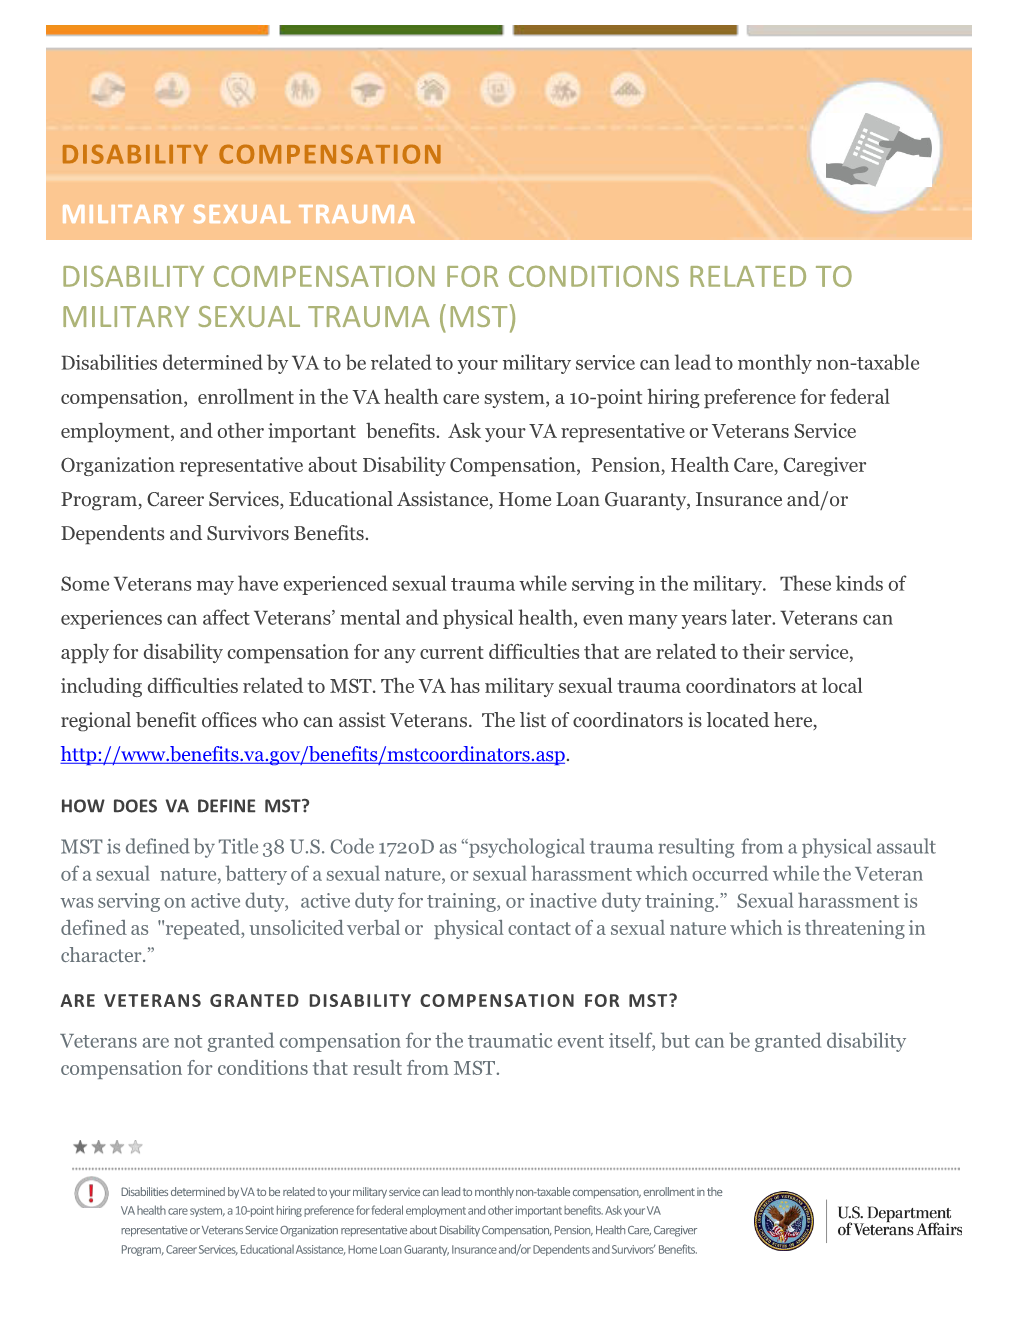 Disability Compensation for Conditions Related to Military Sexual Trauma